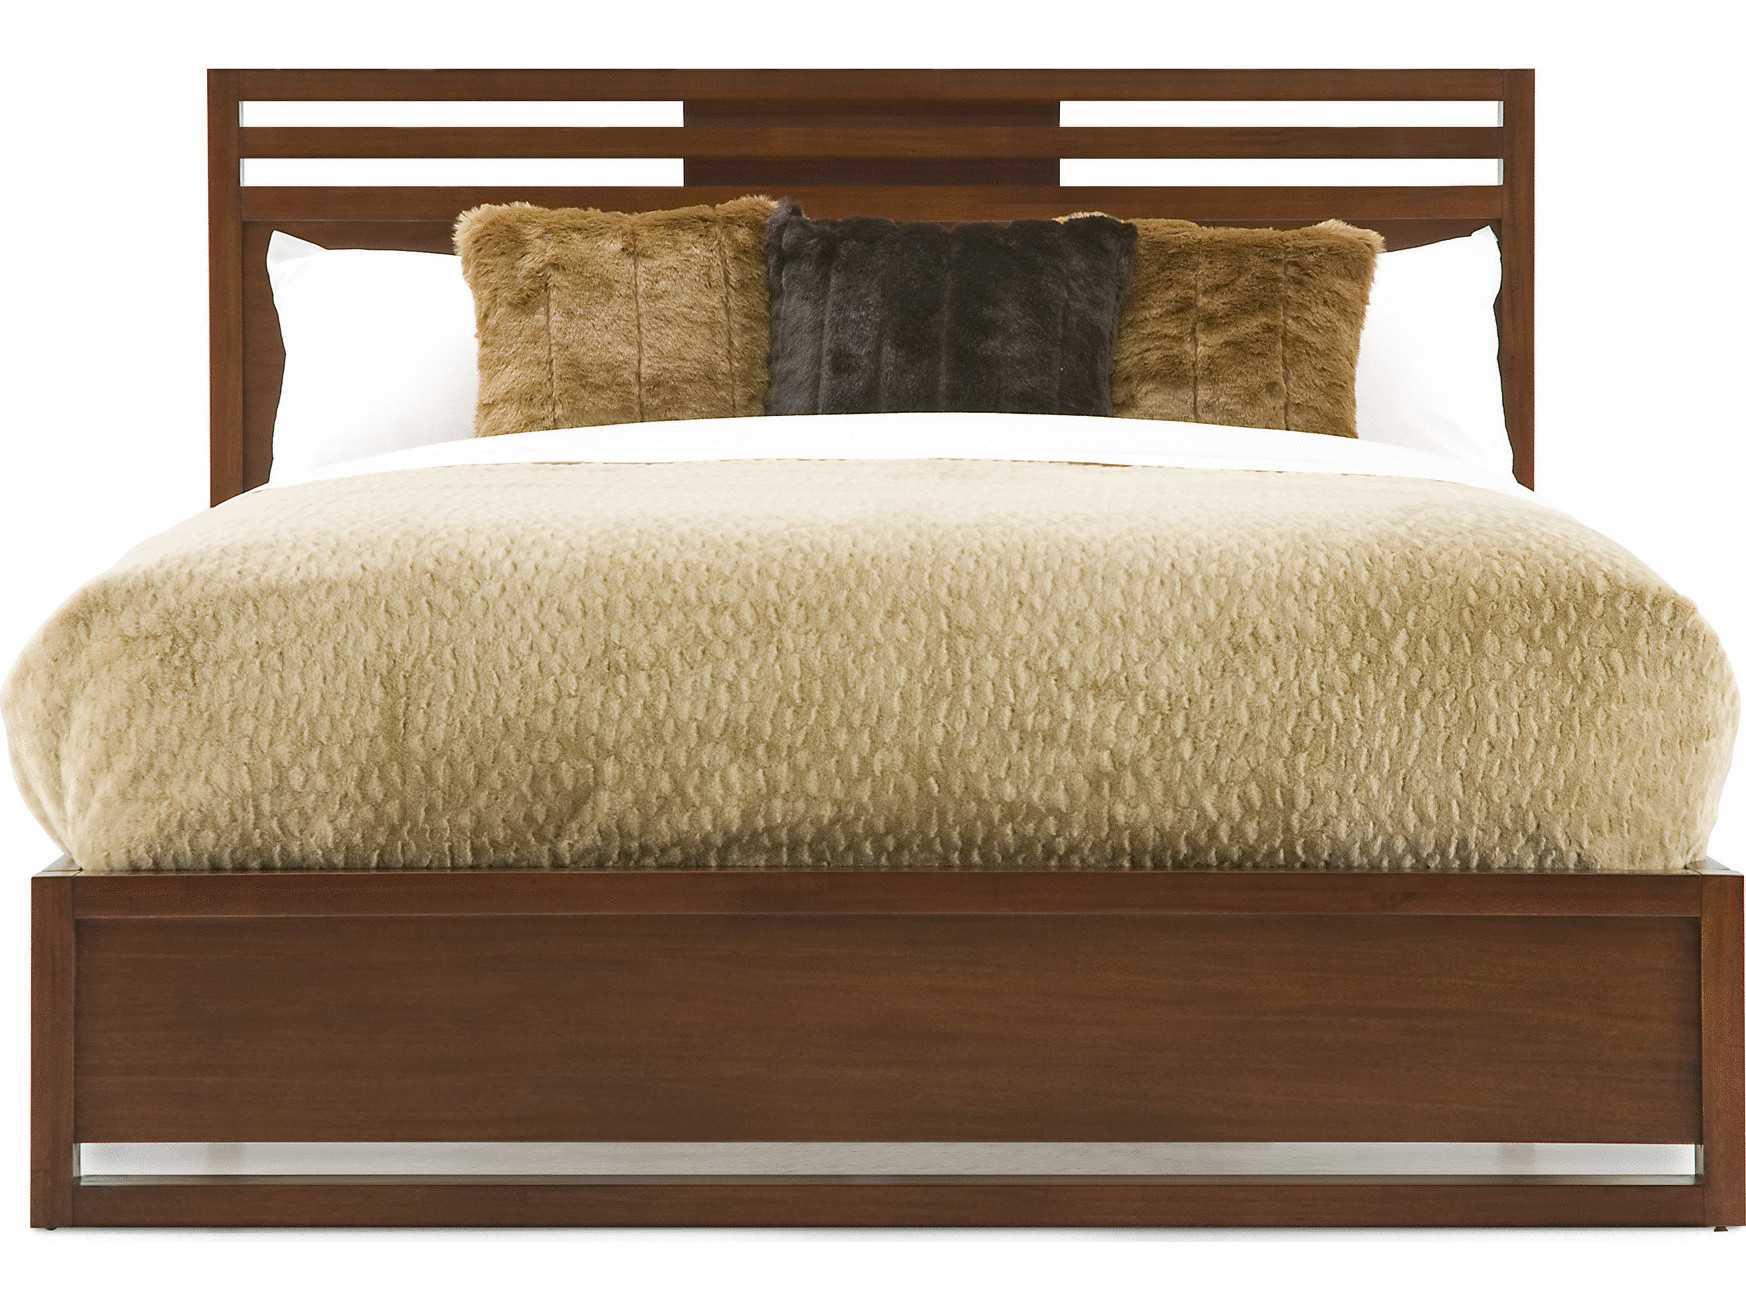 tahoe copper bedroom furniture collection